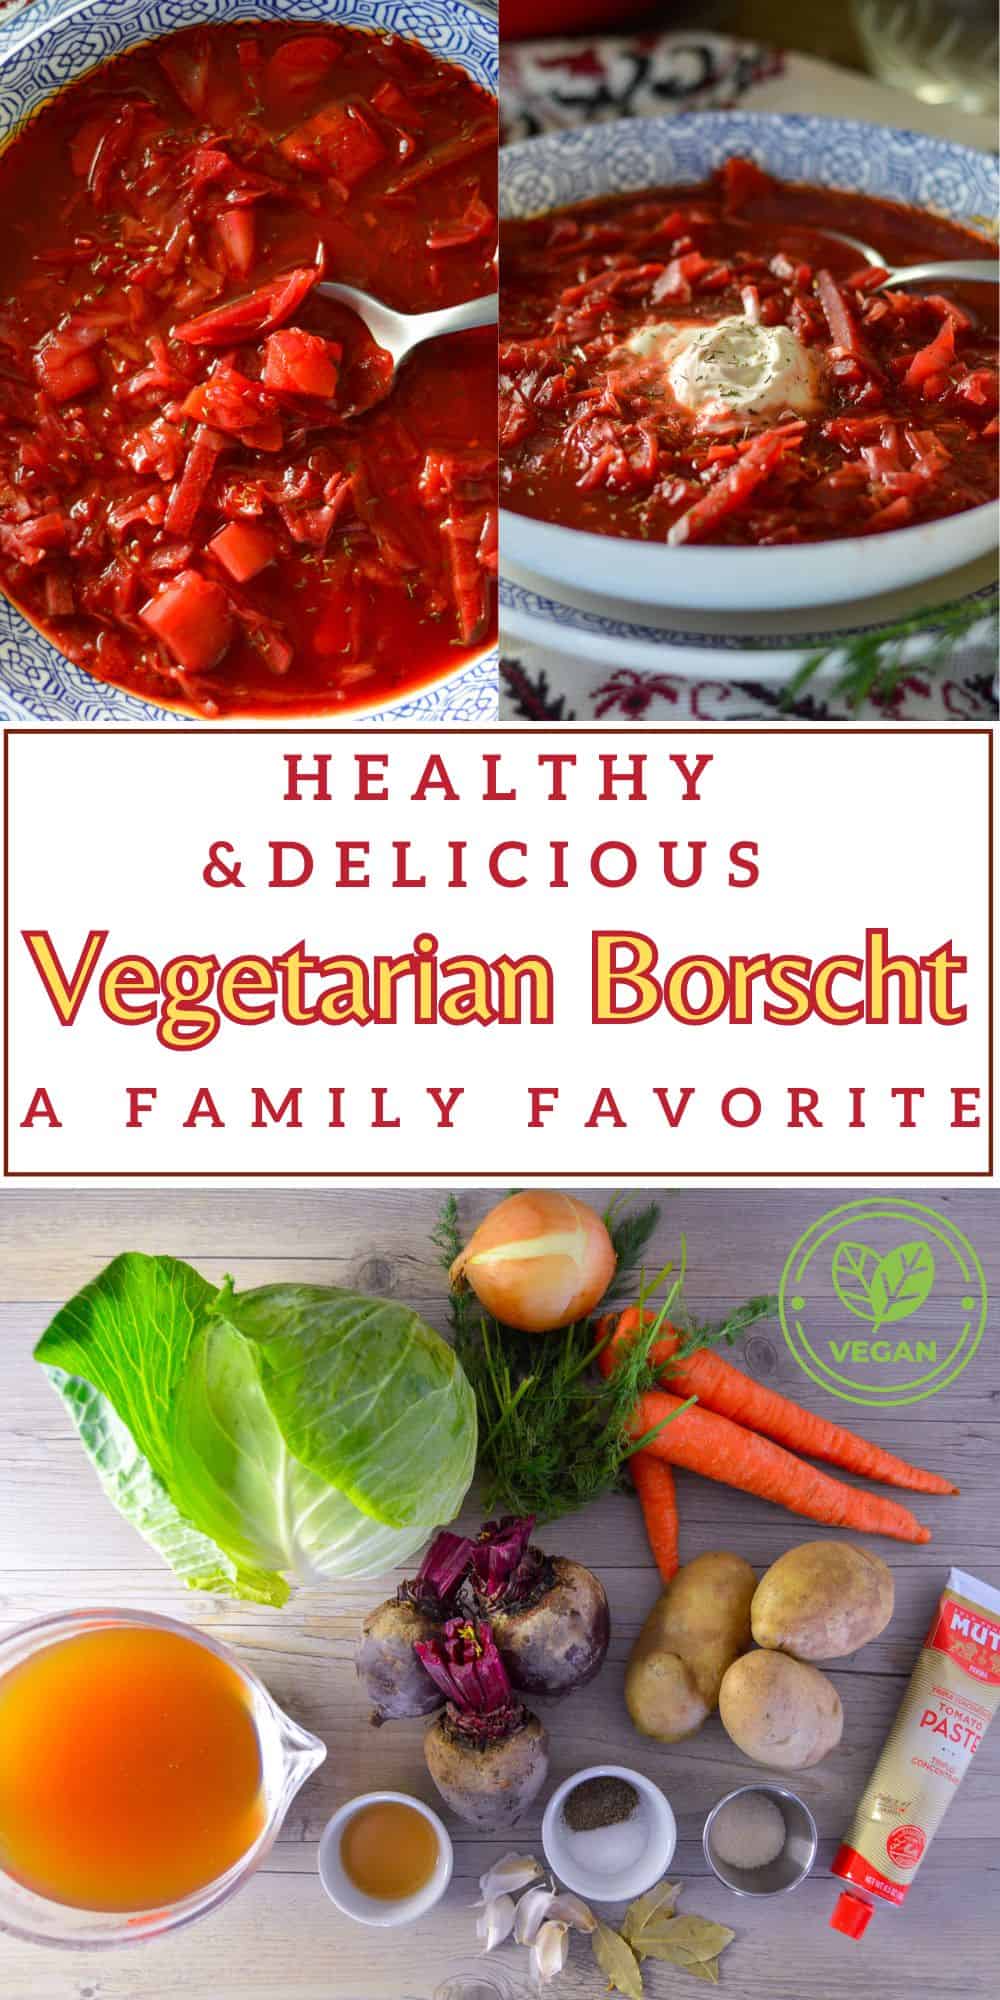 Pinterest Pin with 3 images showing Healthy and Delicious Vegetarian Borscht (a family favorite)